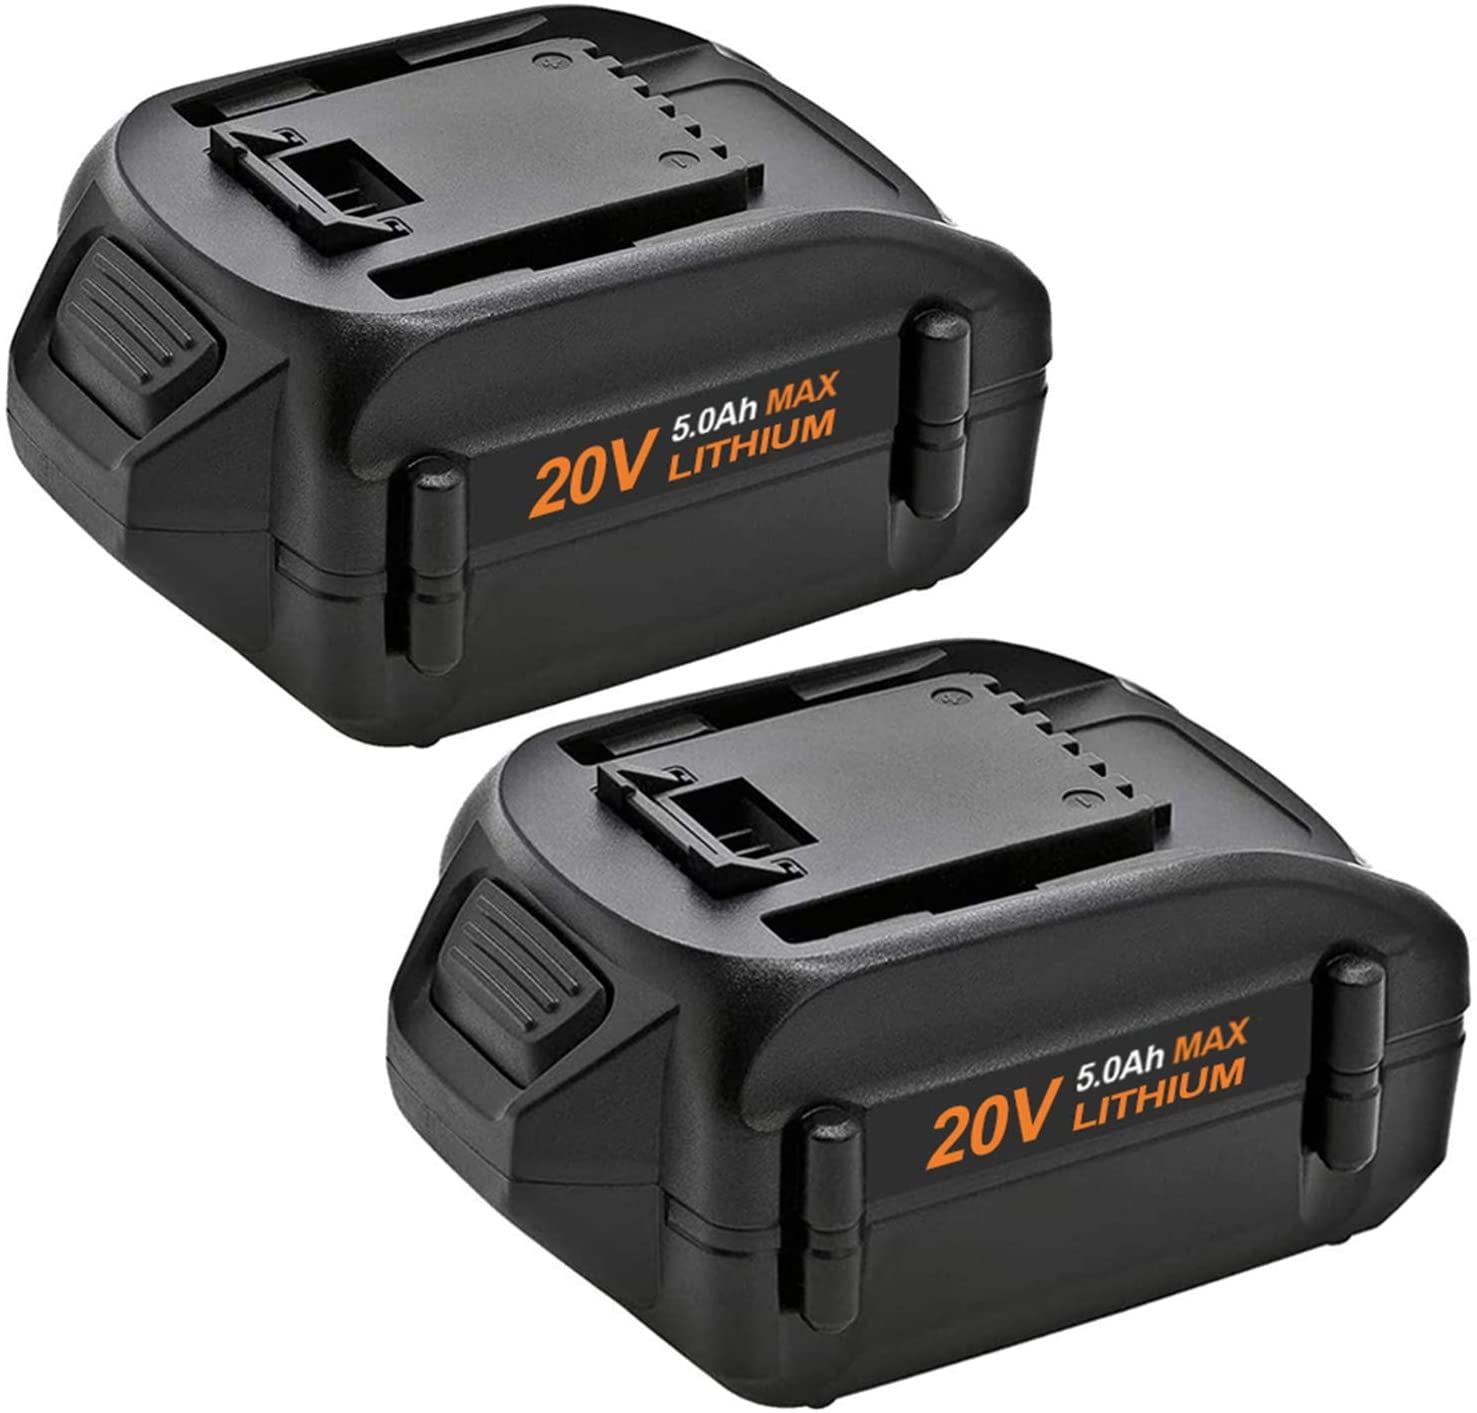 WG251s WG545s WG540s WG155s WG255s WA3525 WG151s WG891 WG890 2 Pack 20v 2.0Ah Replacement Lithium Battery for Worx WA3520 